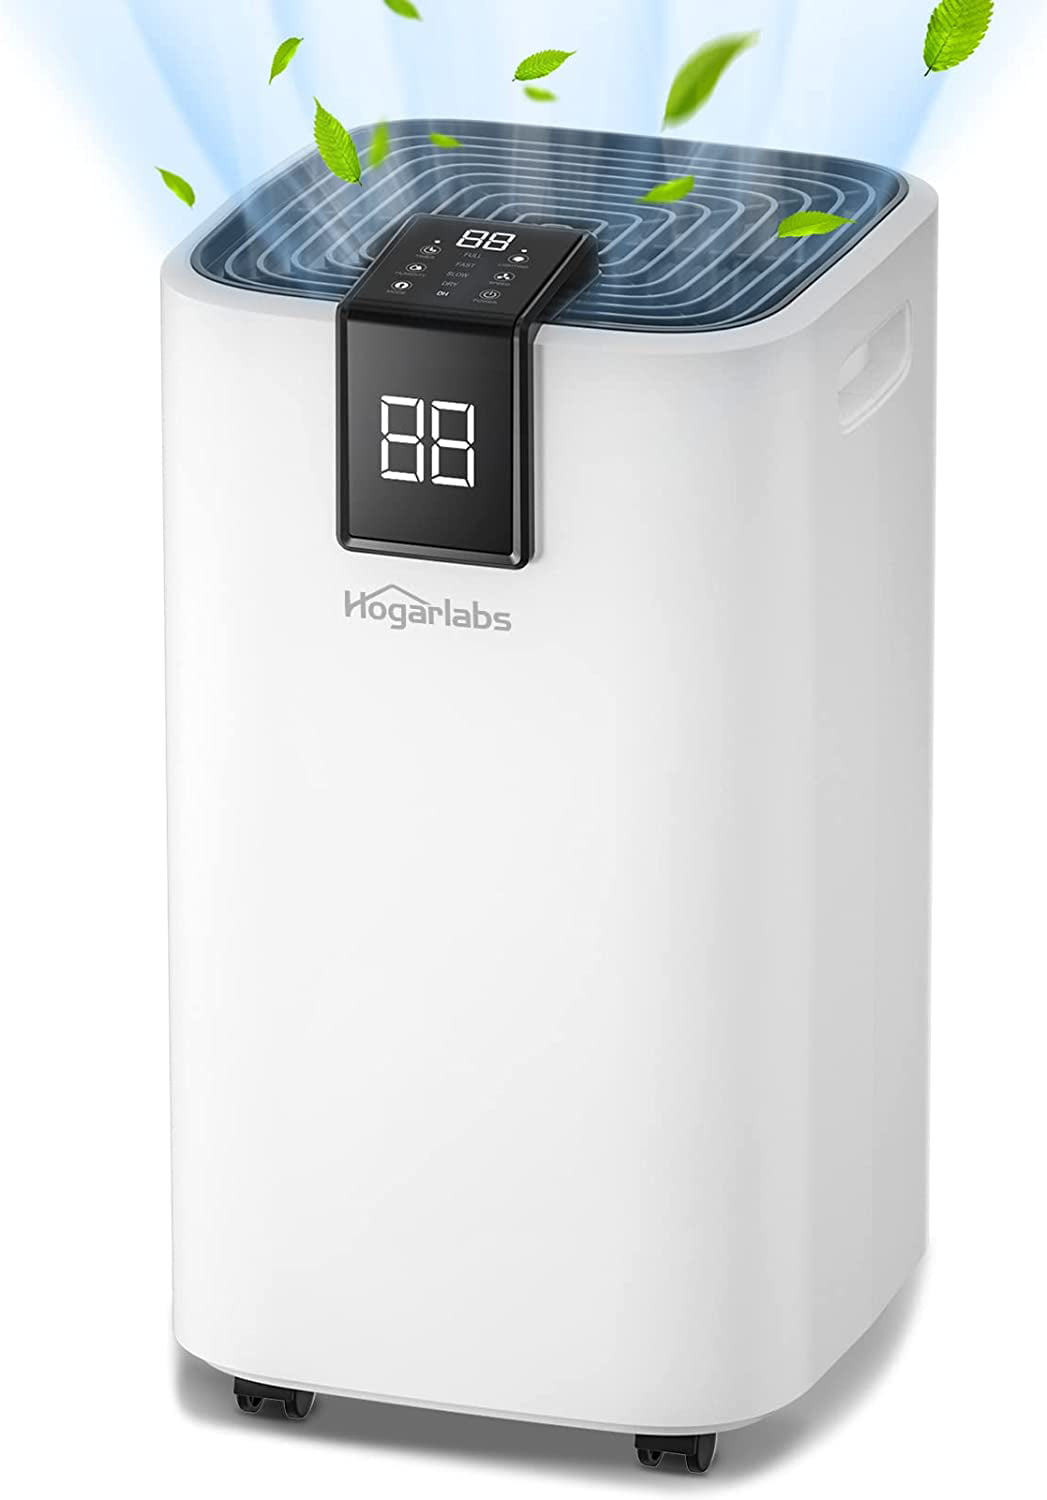 ik luister naar muziek Onmiddellijk mooi zo SWJYH 4500 Sq. Ft Dehumidifier for Basements,Home and Large Room,70 Pint  with Drain Hose and Wheels,Intelligent Humidity Control,Laundry Dry, Auto  Defrost,24H Timer,Automatic Drain - Walmart.com